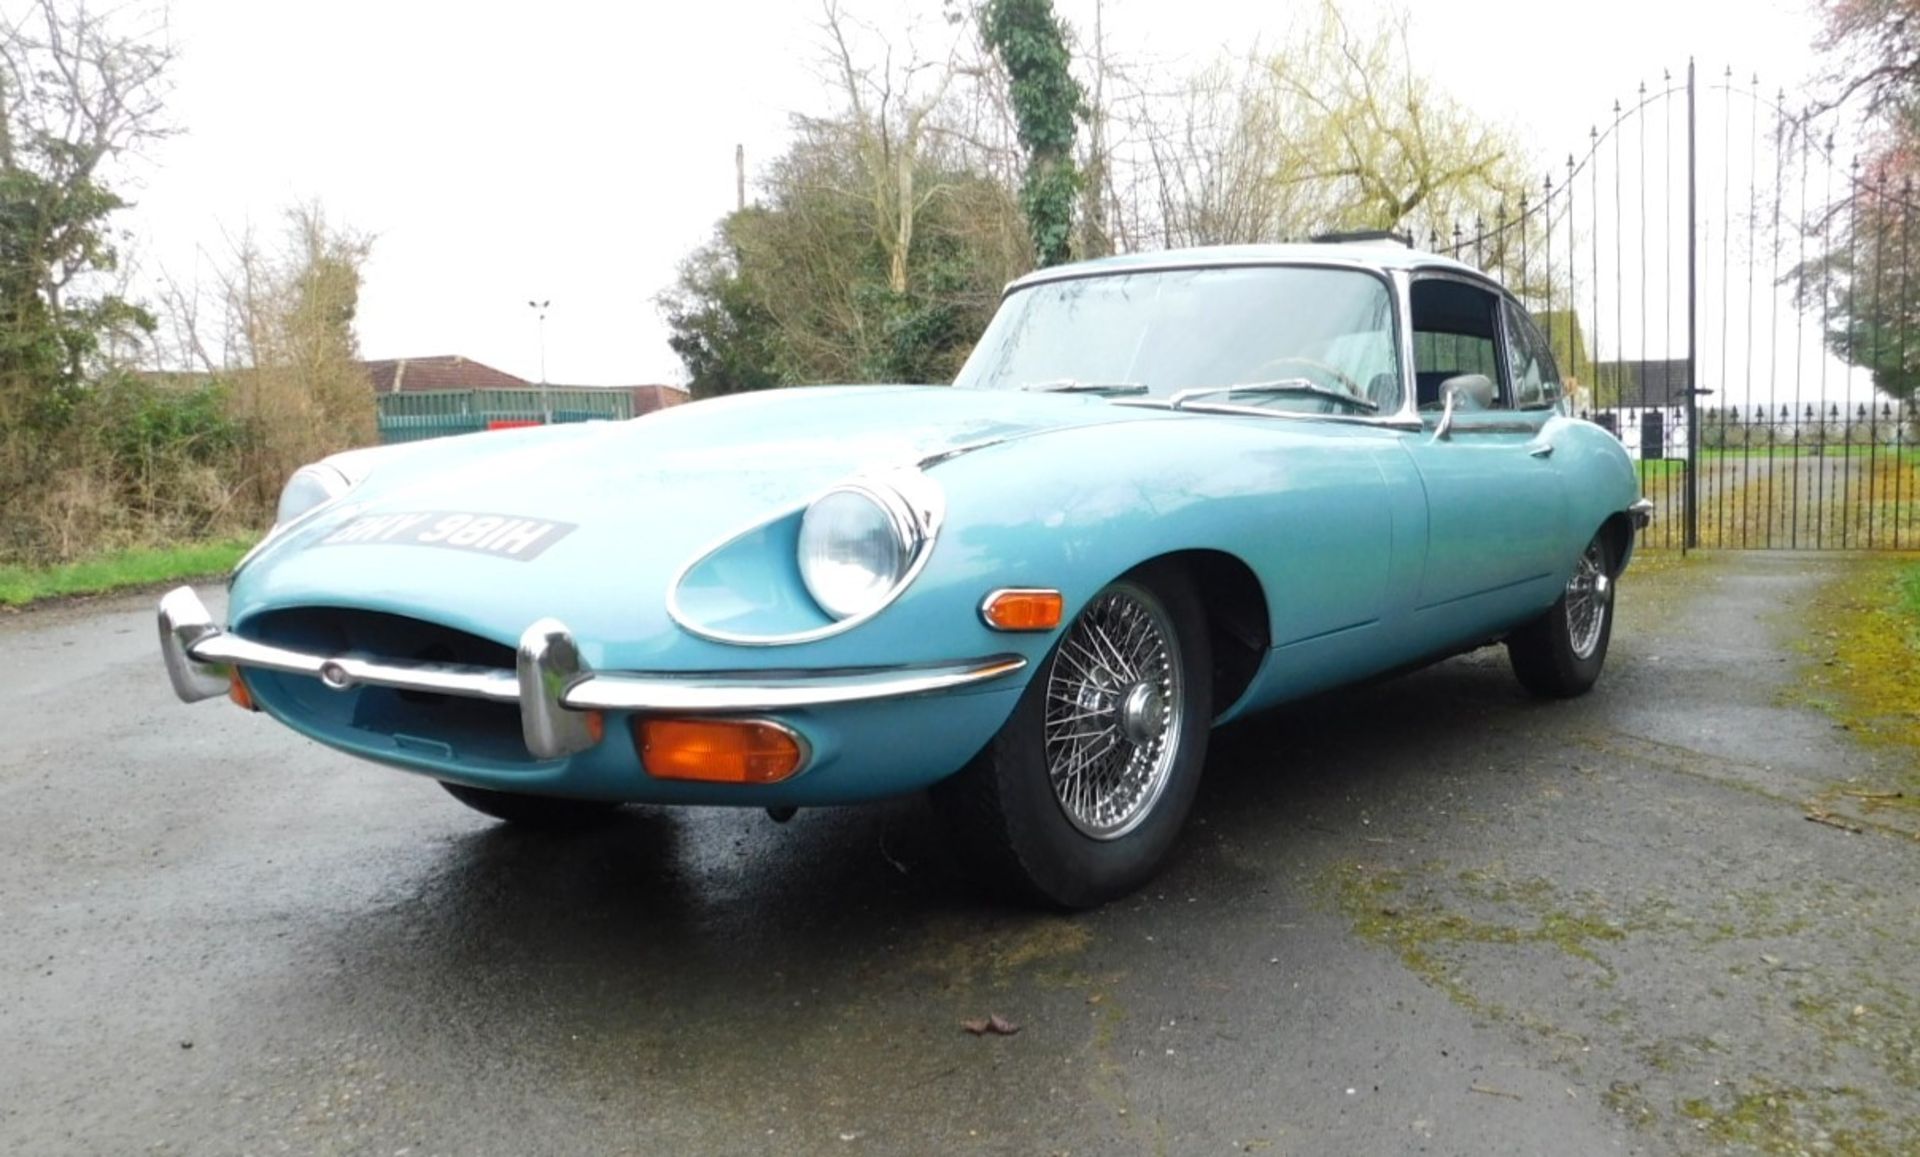 1970 JAGUAR E-TYPE SERIES II 2+2 COUPE Registration Number: BHY 981H Chassis Number: P1R44144BW